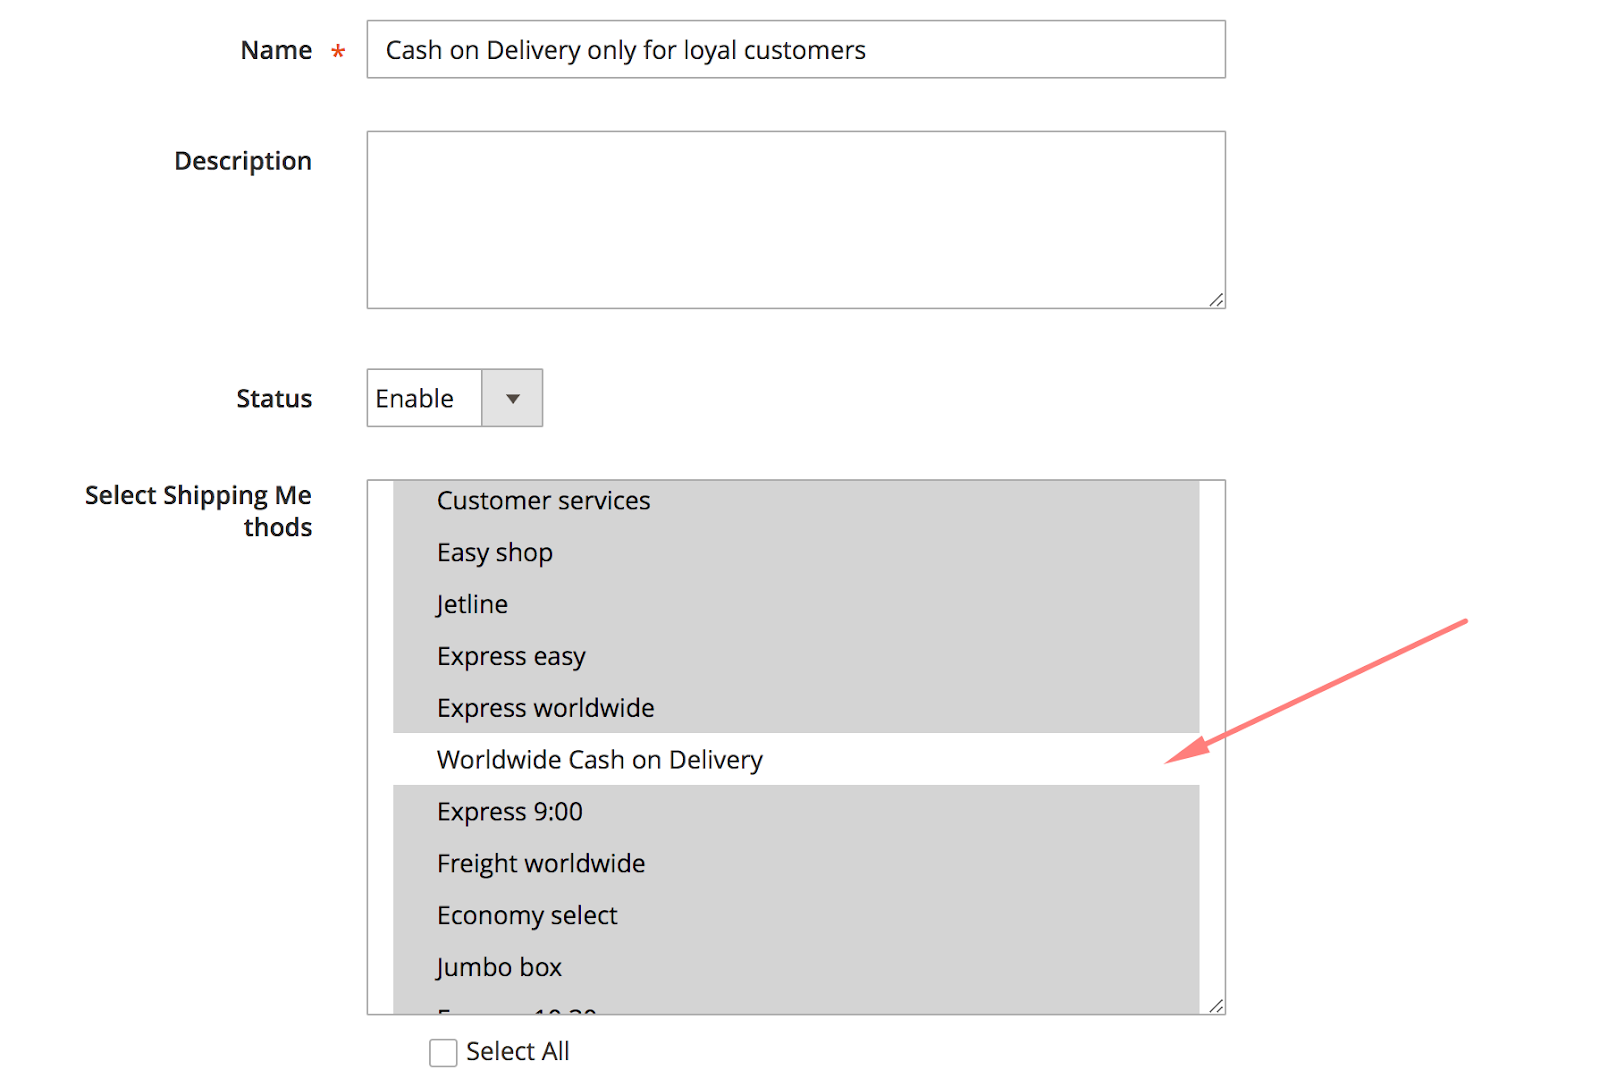 Enable Cash on Delivery only for specific group of customers - Rule #1